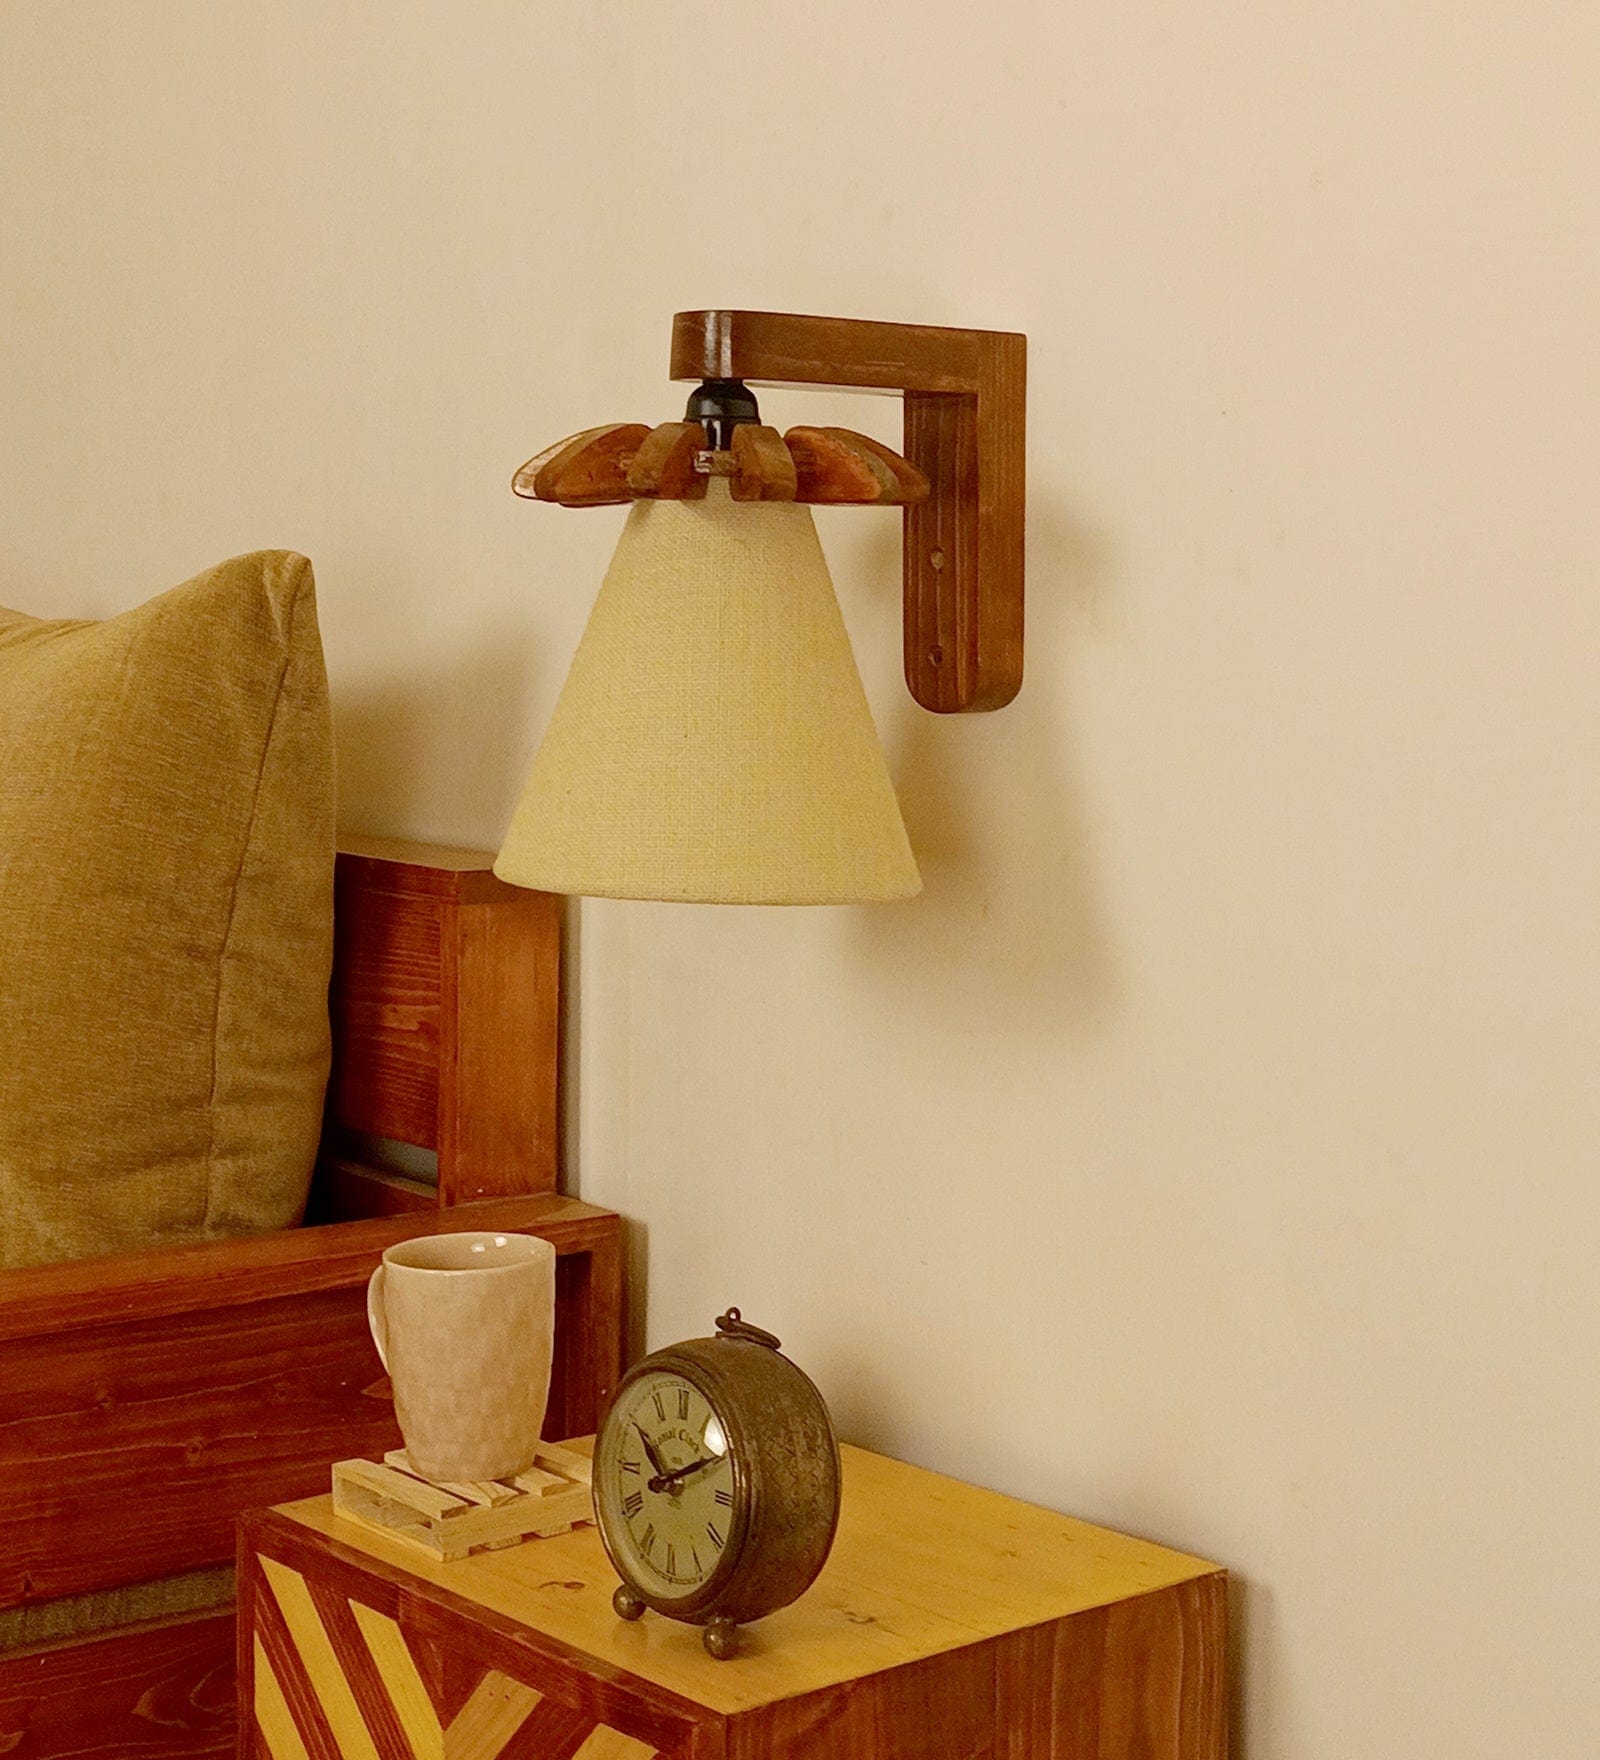 Whirl Brown Wooden Wall Light (BULB NOT INCLUDED)